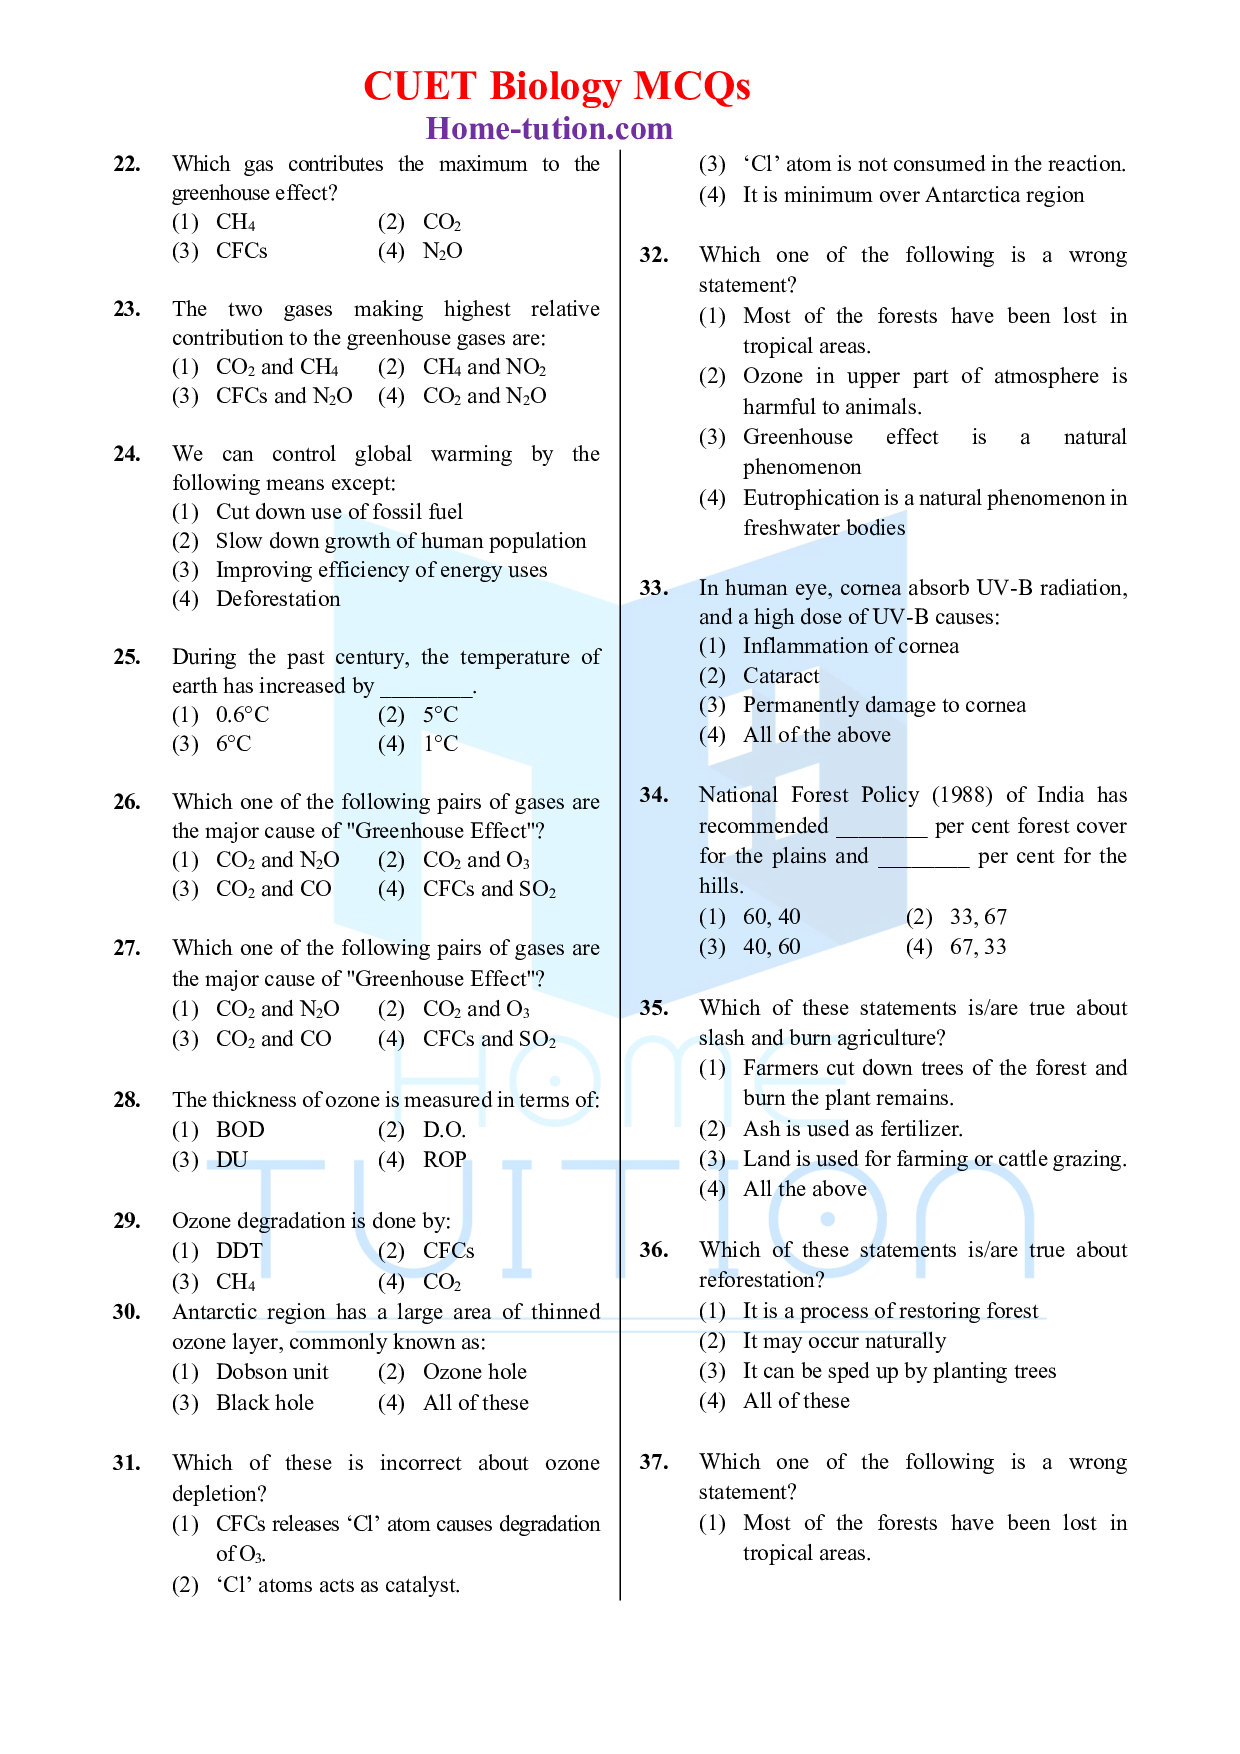 Biology MCQ Questions for CUET Chapter 16 Environmental Issues